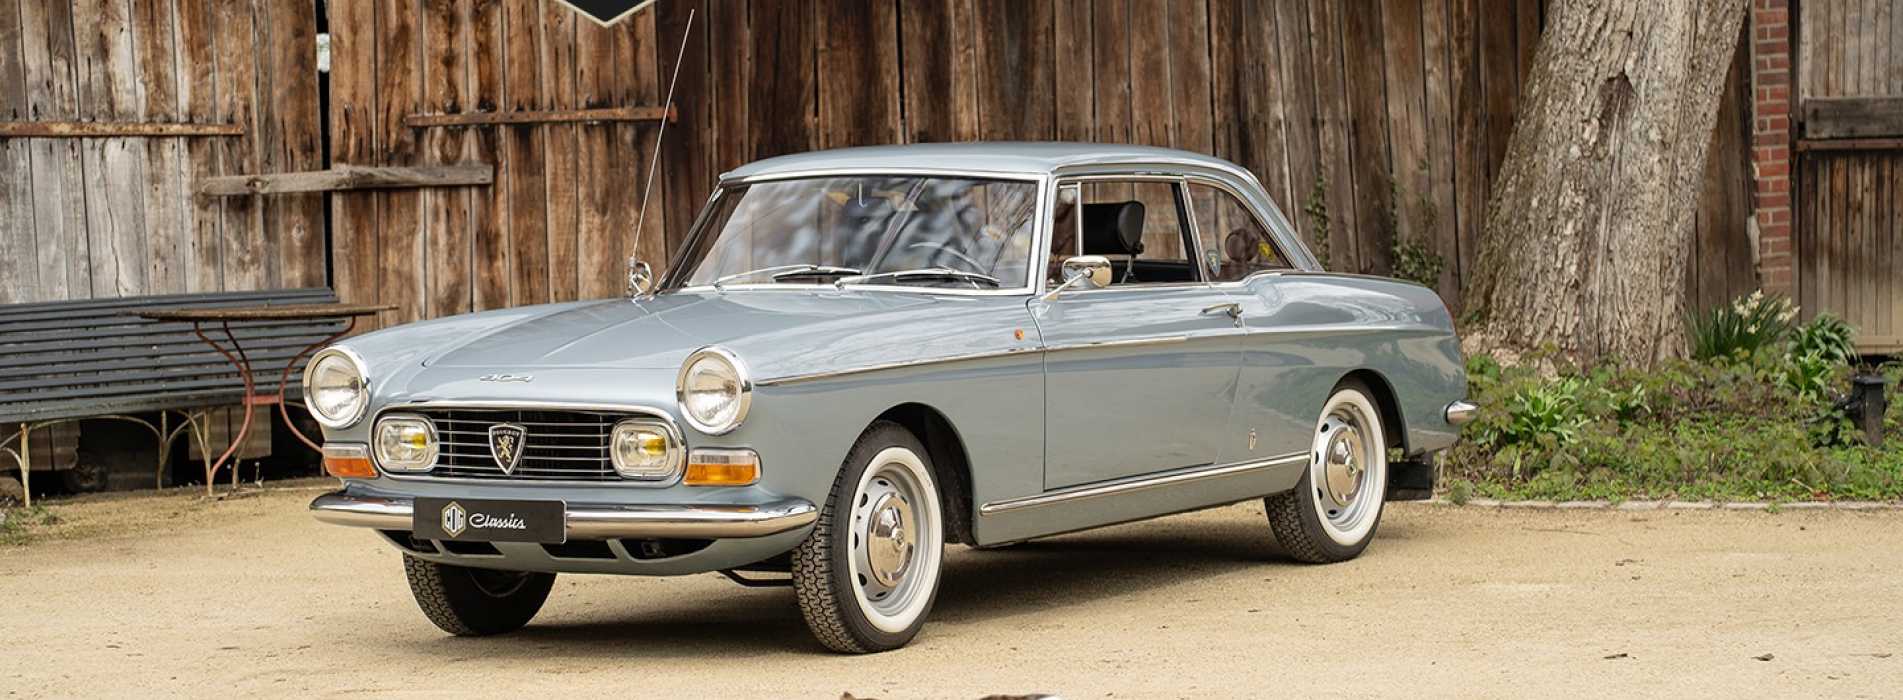 Peugeot 404 Coupe 8